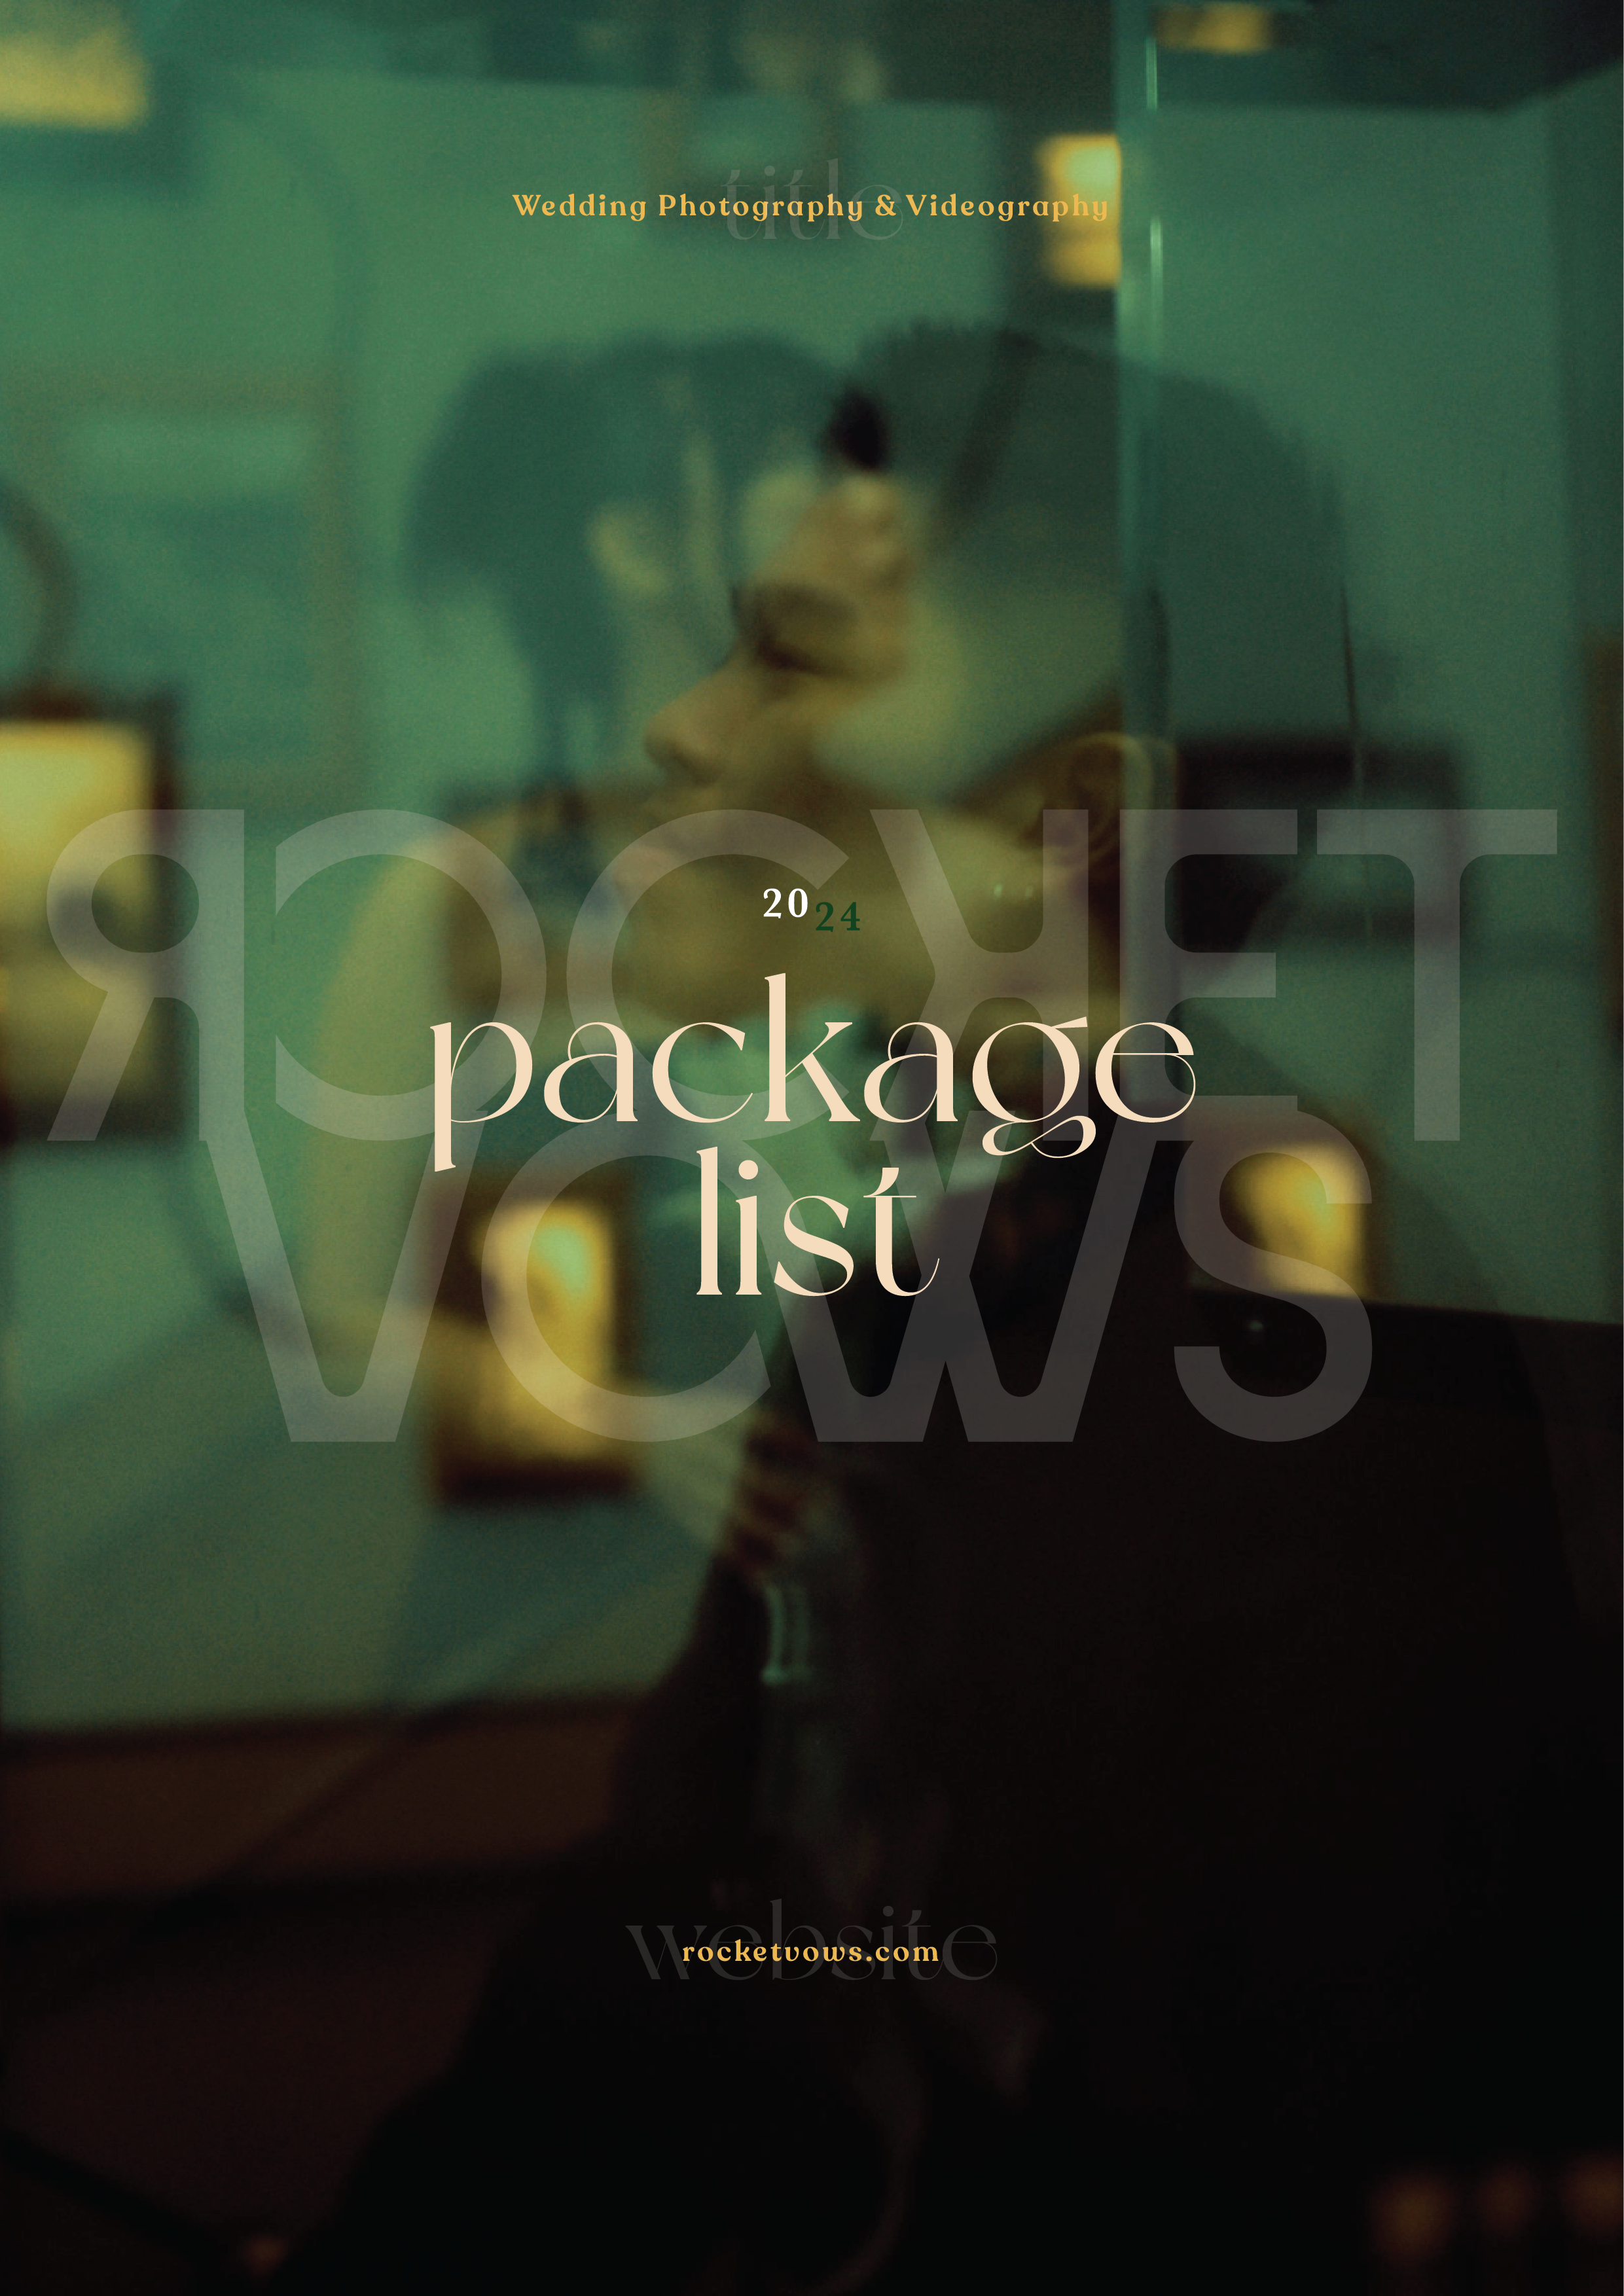 RVS PACKAGE-06.png